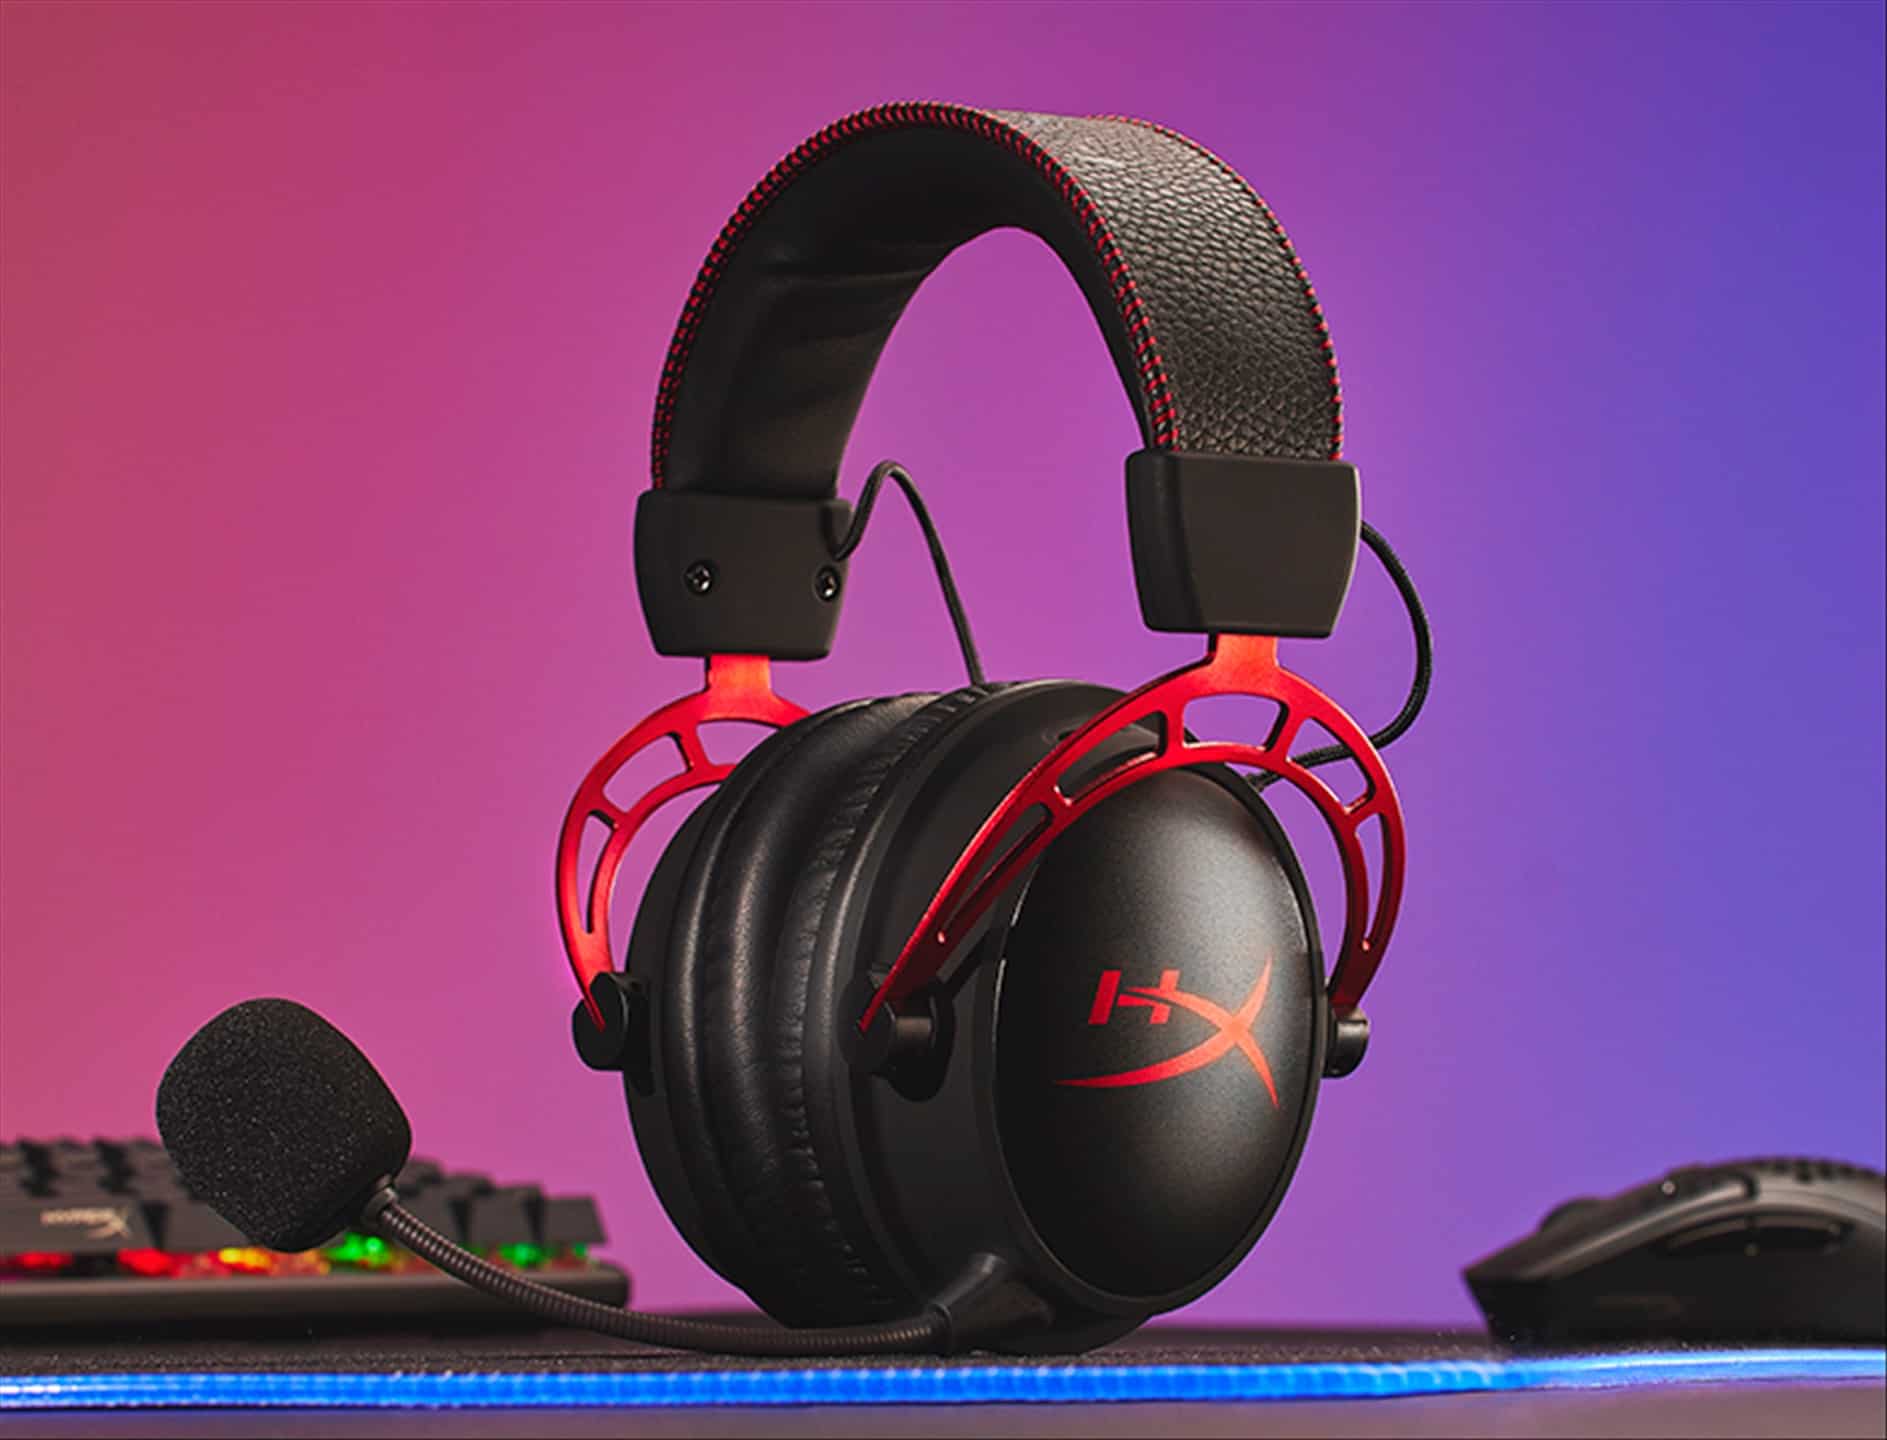 HyperX announced a 300-hour wireless gaming headset at CES 2022 and more